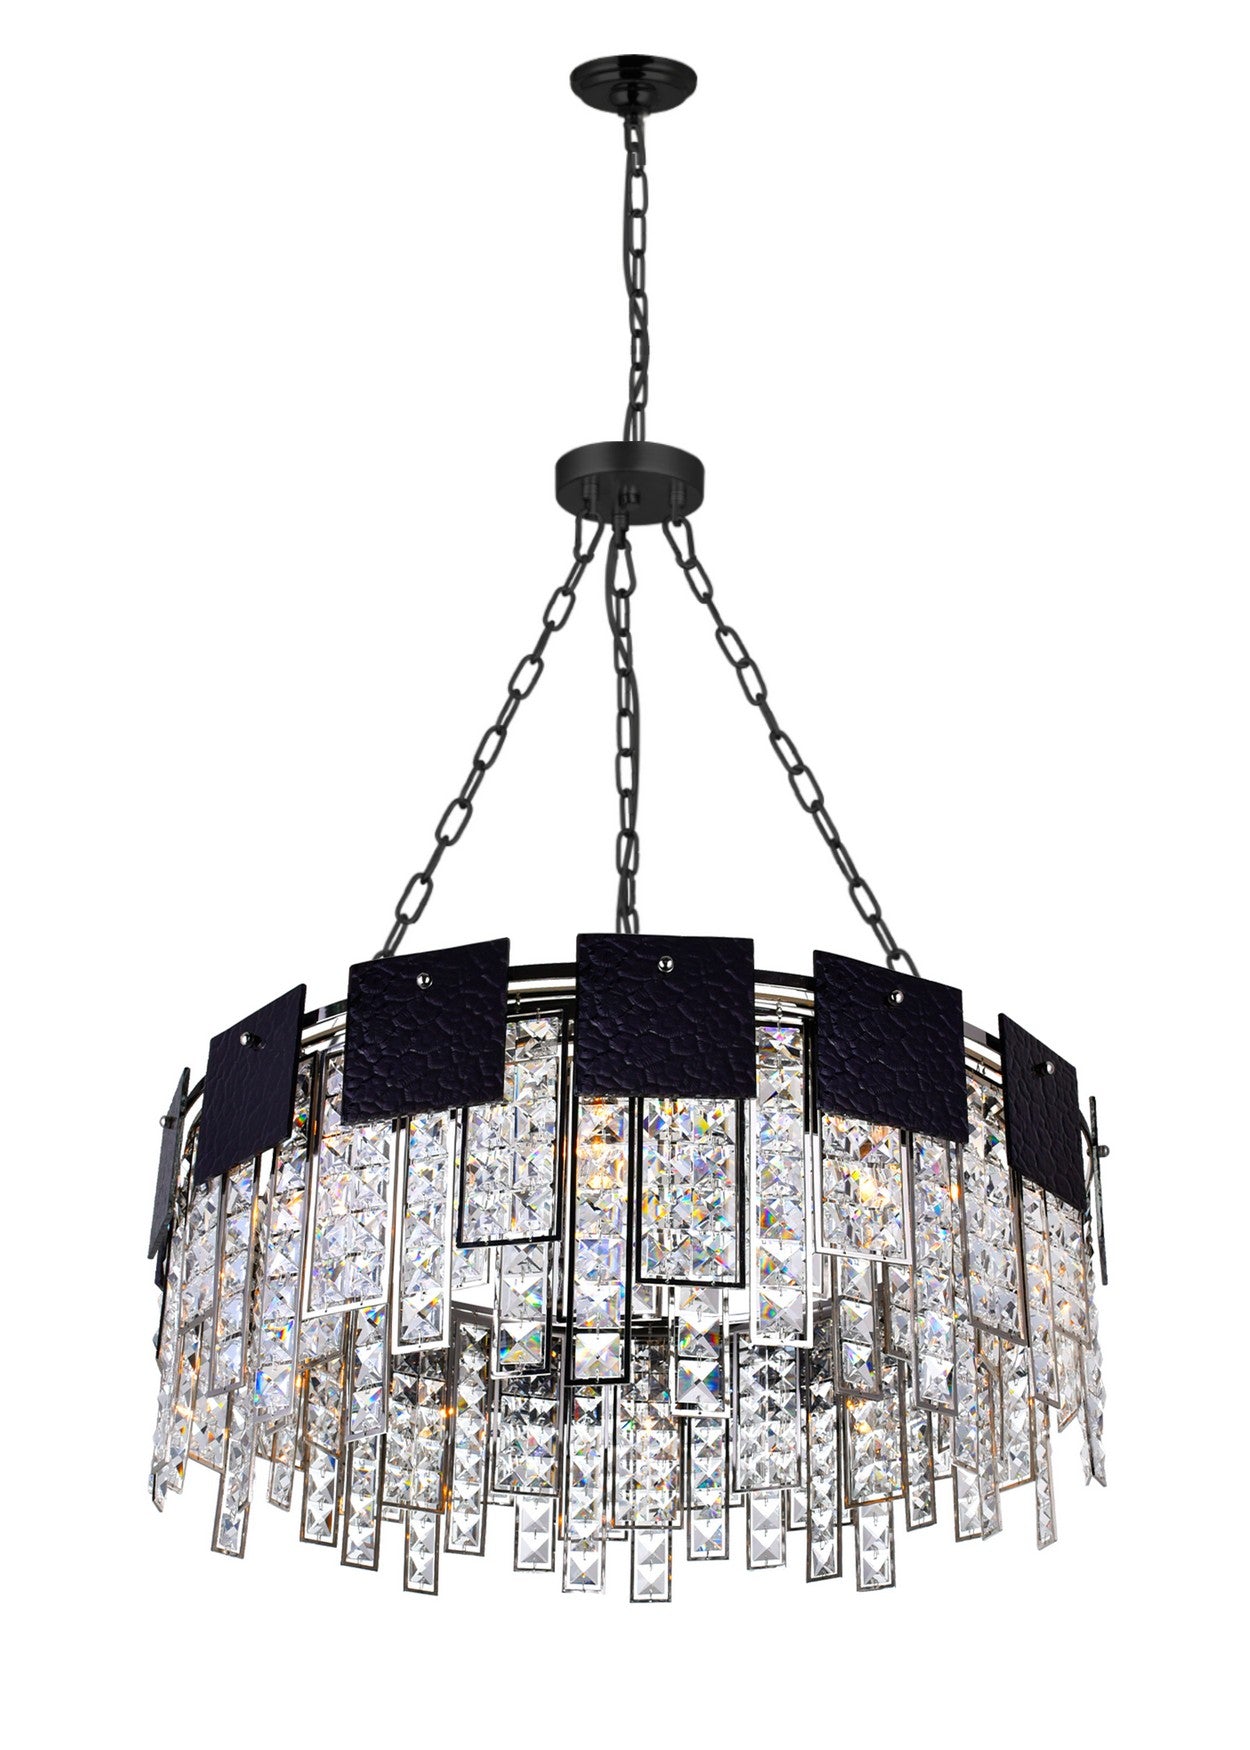 10 LIGHT DOWN CHANDELIER WITH POLISHED NICKEL FINISH - Dreamart Gallery